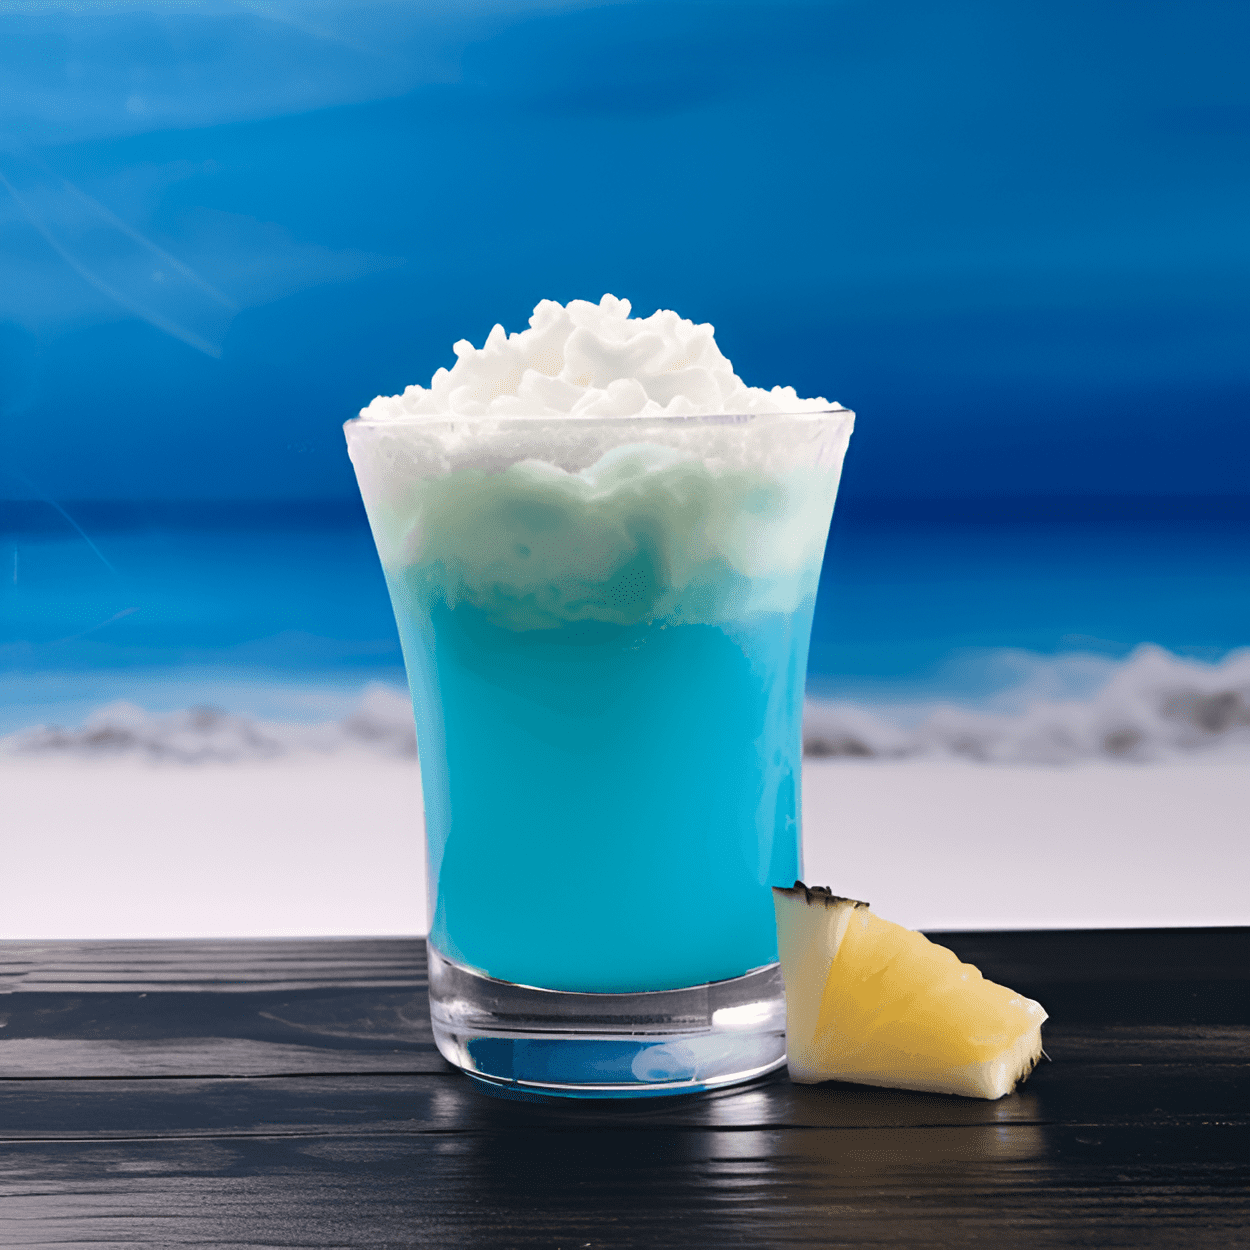 Blue Scooby Snack Cocktail Recipe - The Blue Scooby Snack is a sweet and creamy cocktail with a hint of tropical fruit flavors. The combination of coconut rum, blue curacao, and pineapple juice gives it a fruity and refreshing taste, while the cream adds a rich and smooth texture. The sweetness of the drink is balanced by the tartness of the pineapple juice, making it a delightful and balanced cocktail.